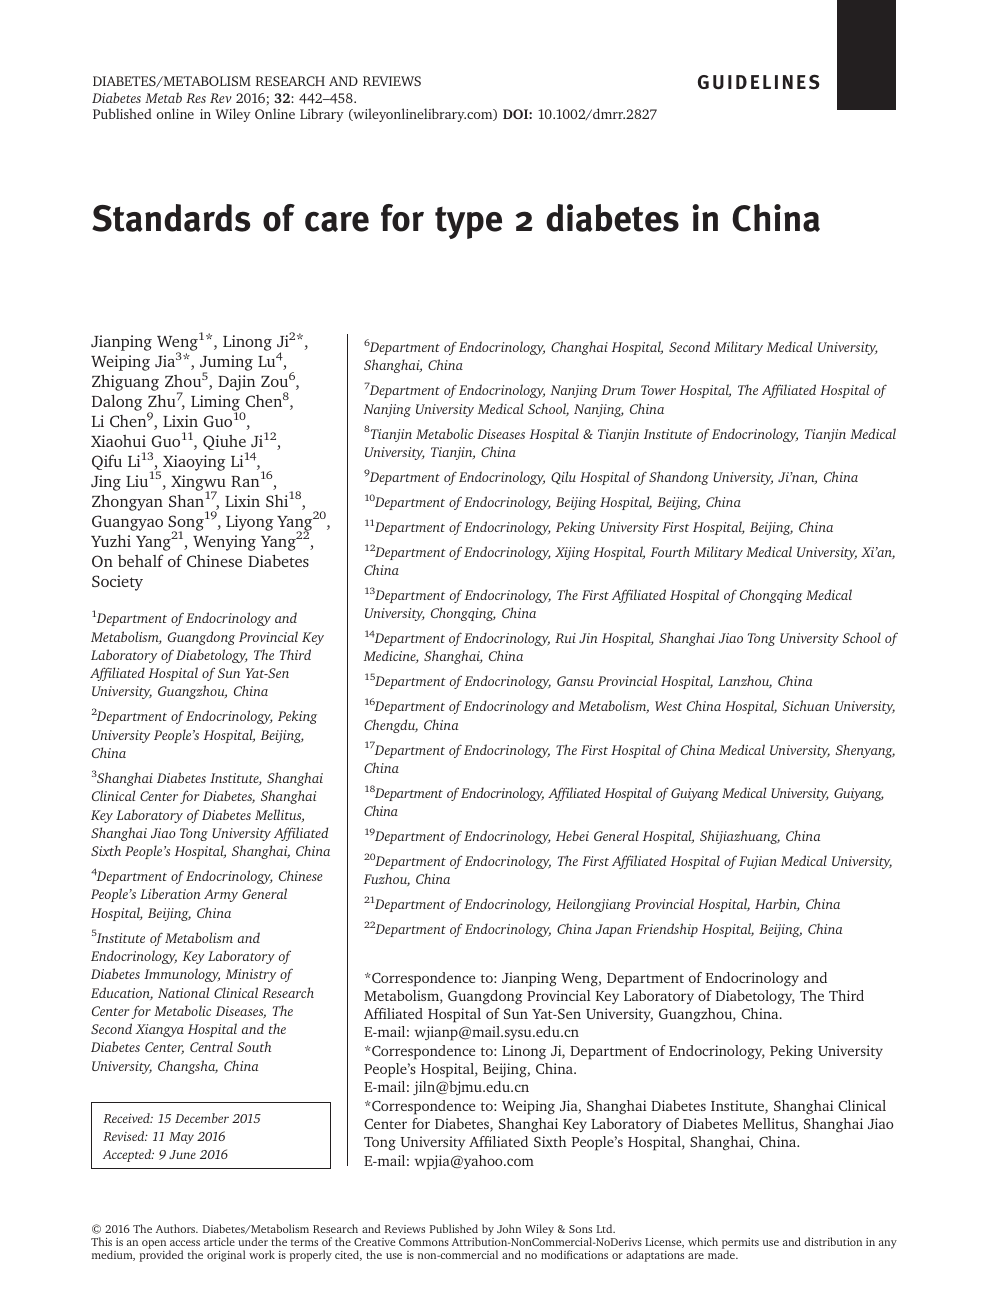 diabetes/metabolism research and reviews